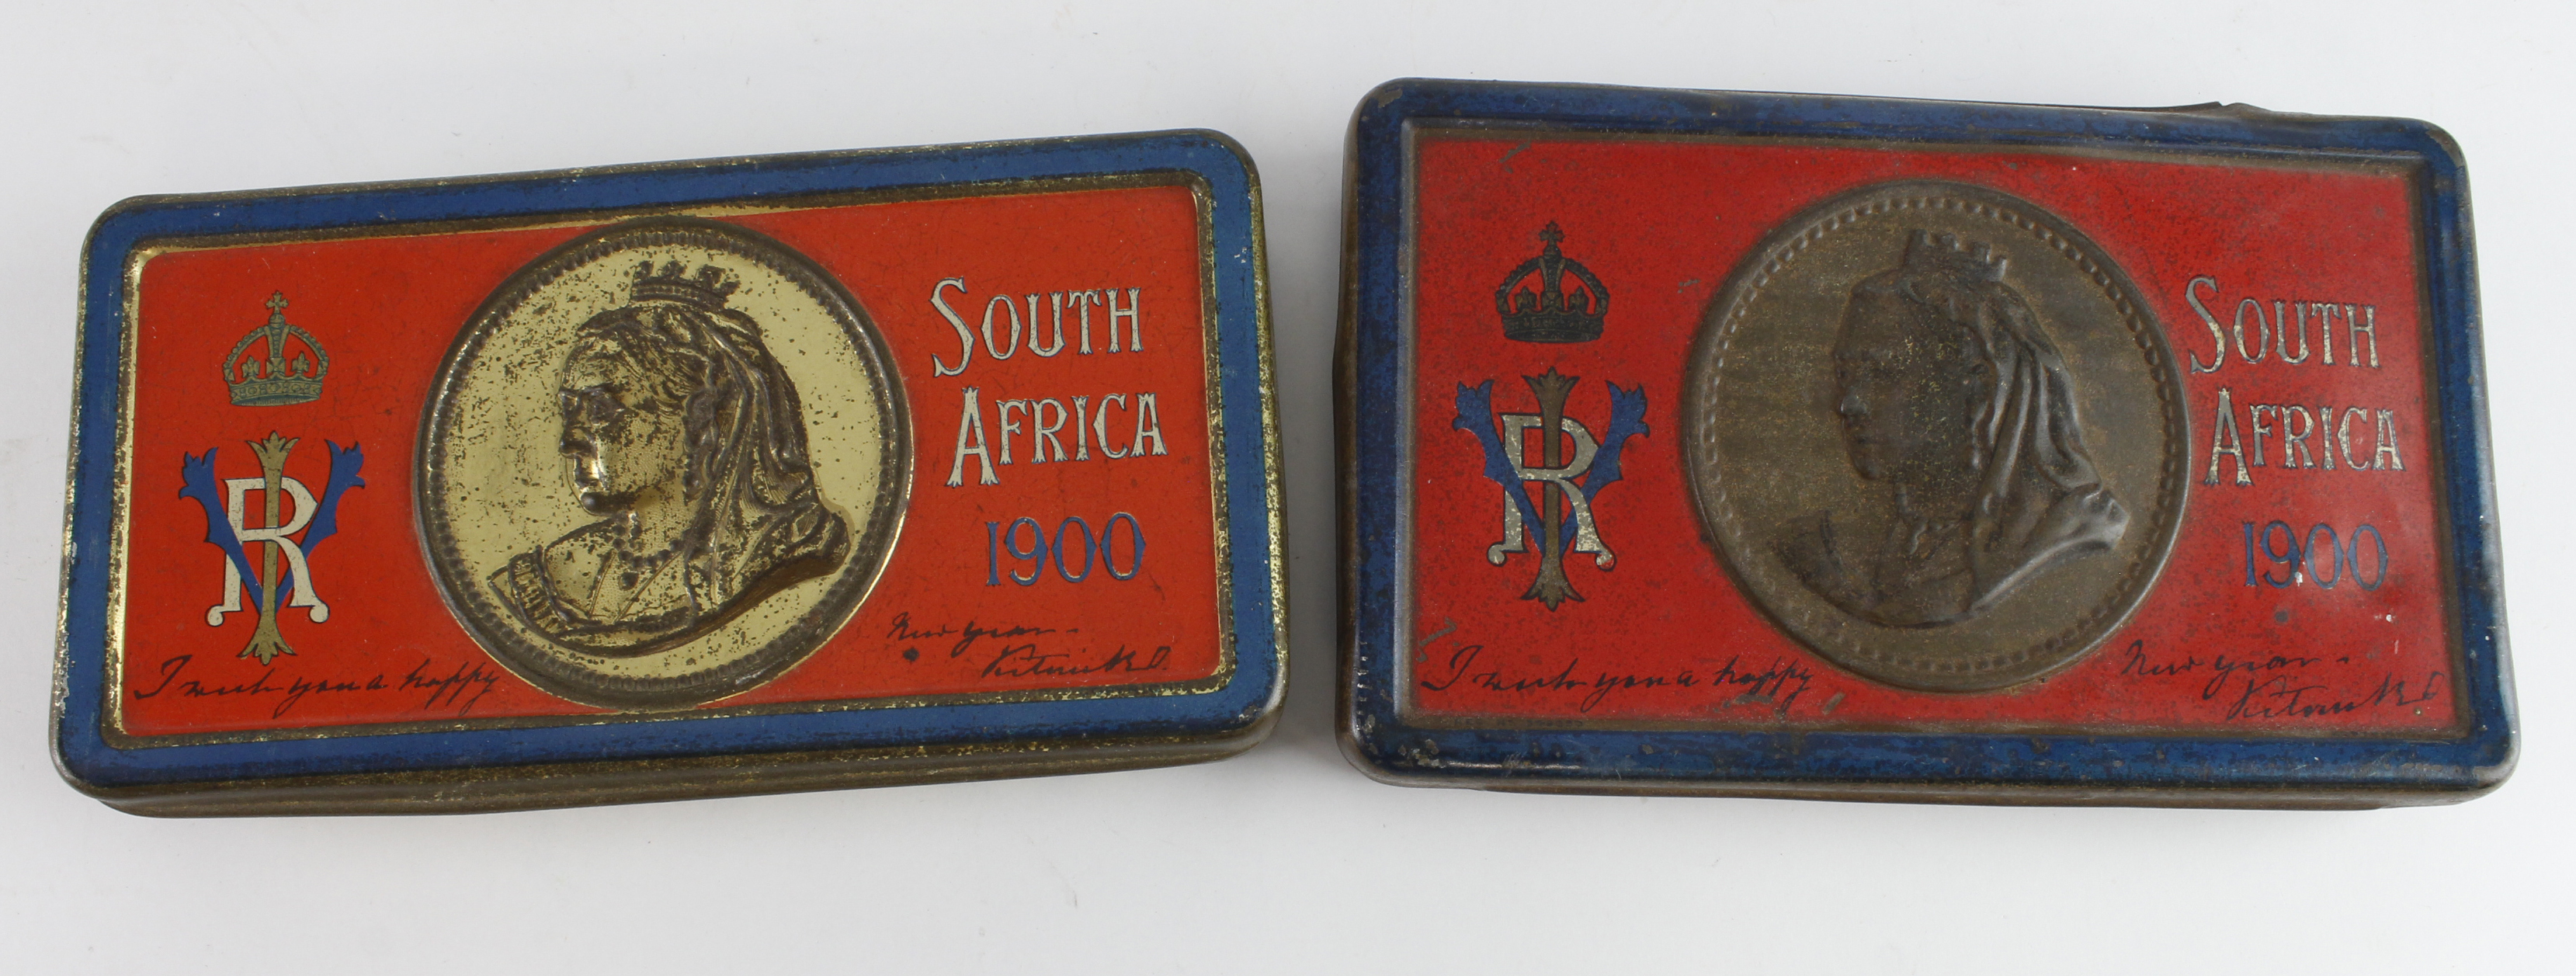 Boer War South Africa 1900 tins, different types, empty (2)